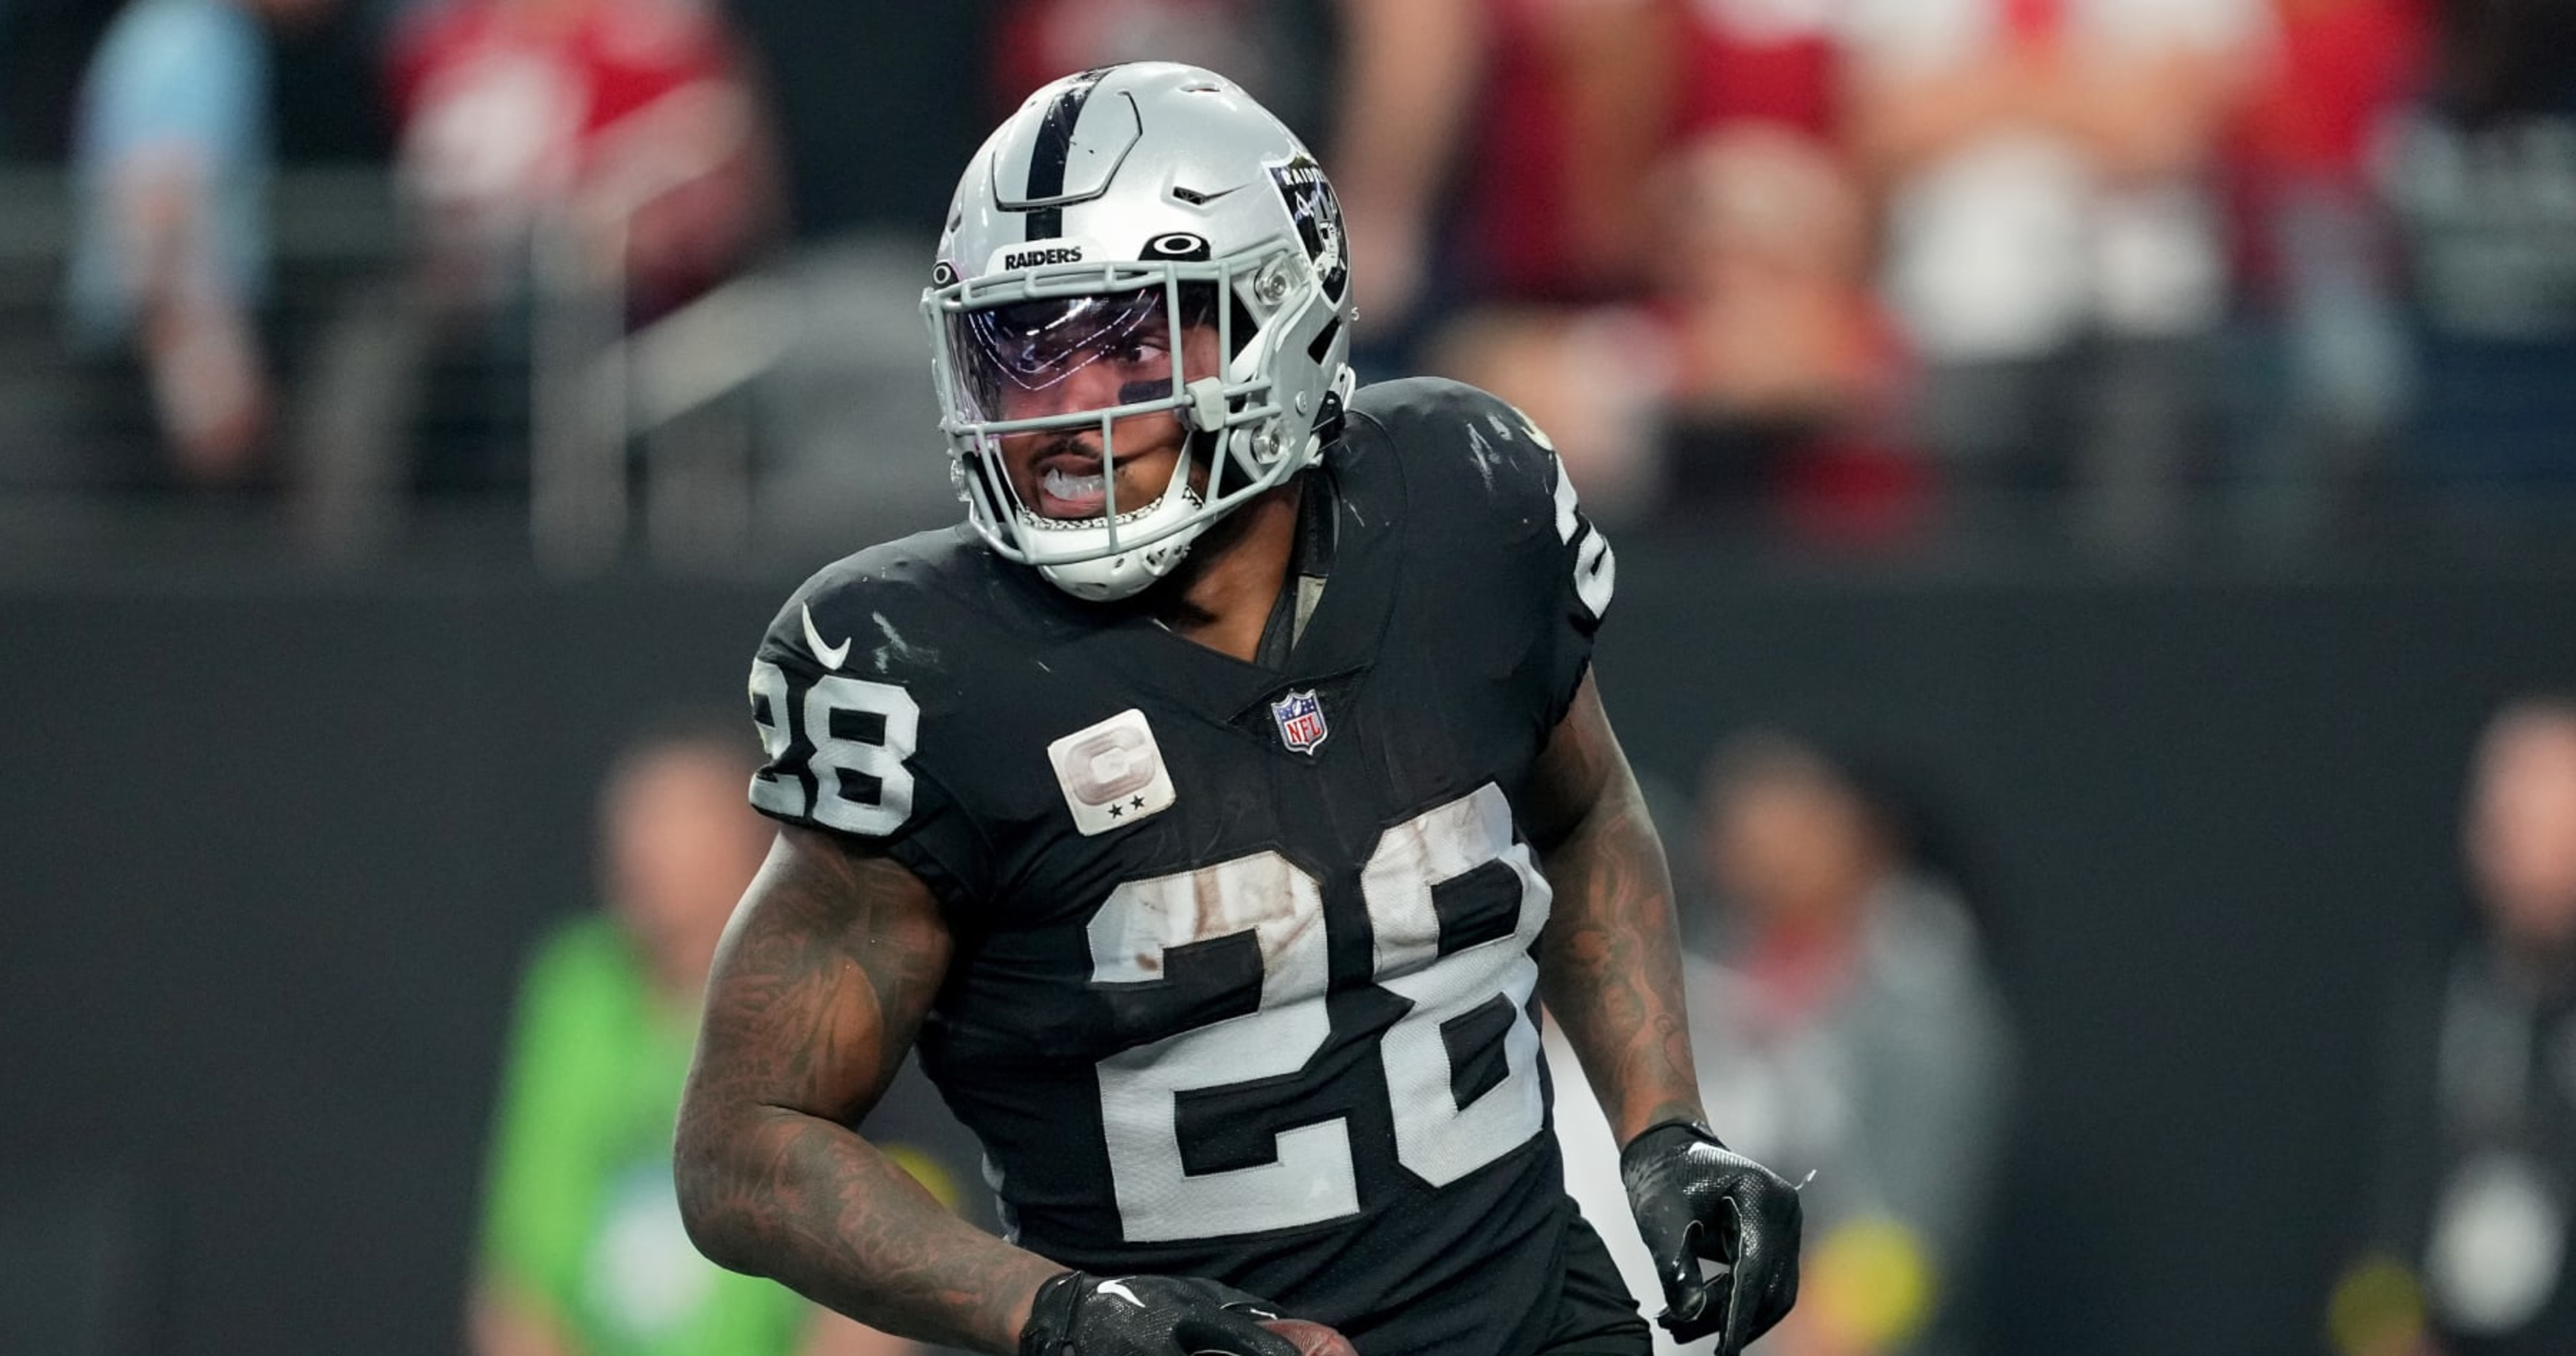 Raiders coach has 'hope and goal' for Josh Jacobs 